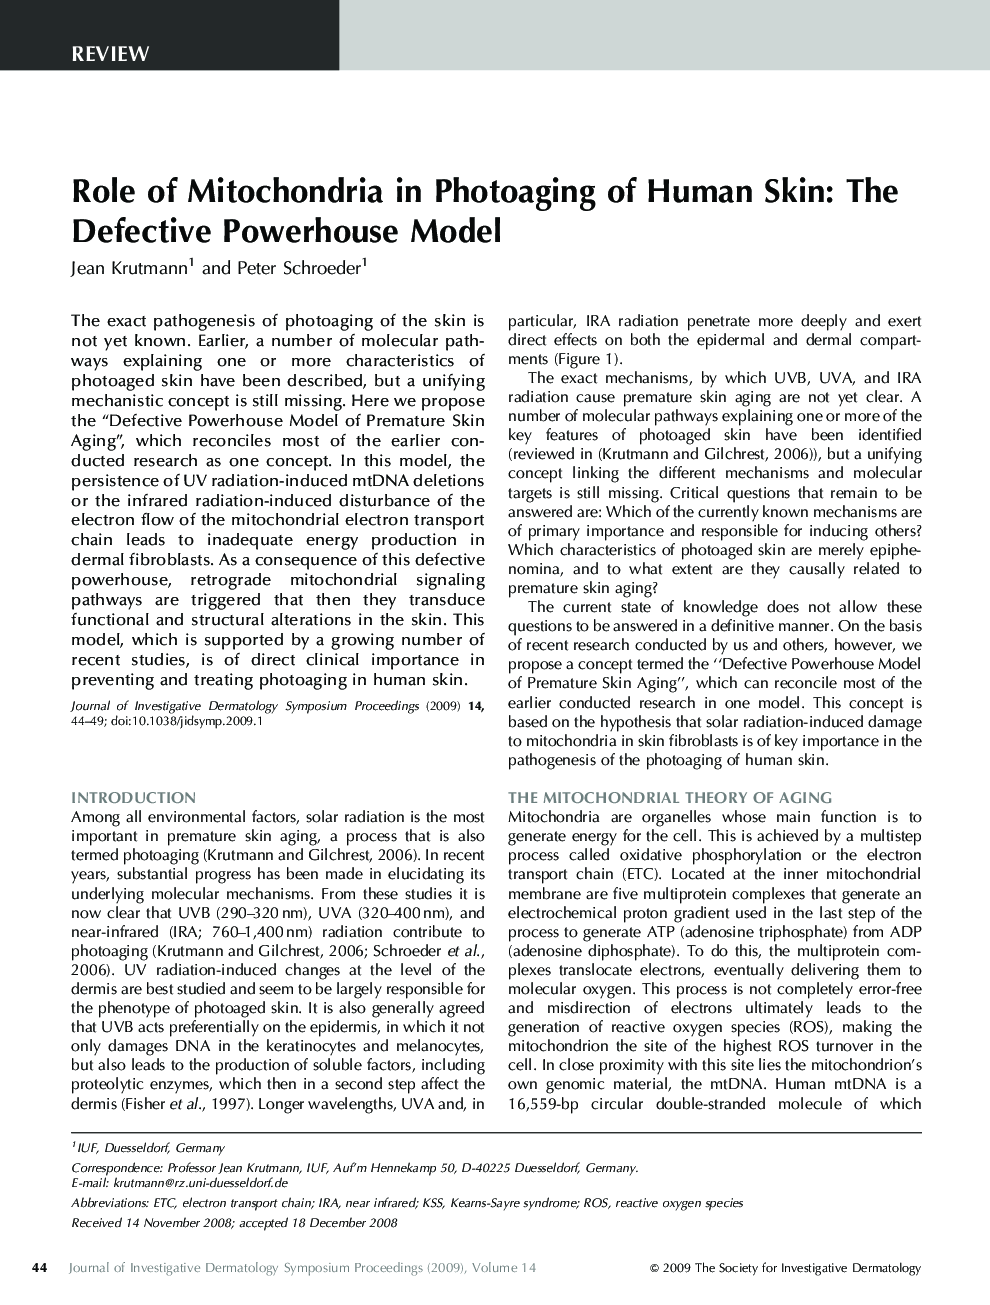 Role of Mitochondria in Photoaging of Human Skin: The Defective Powerhouse Model